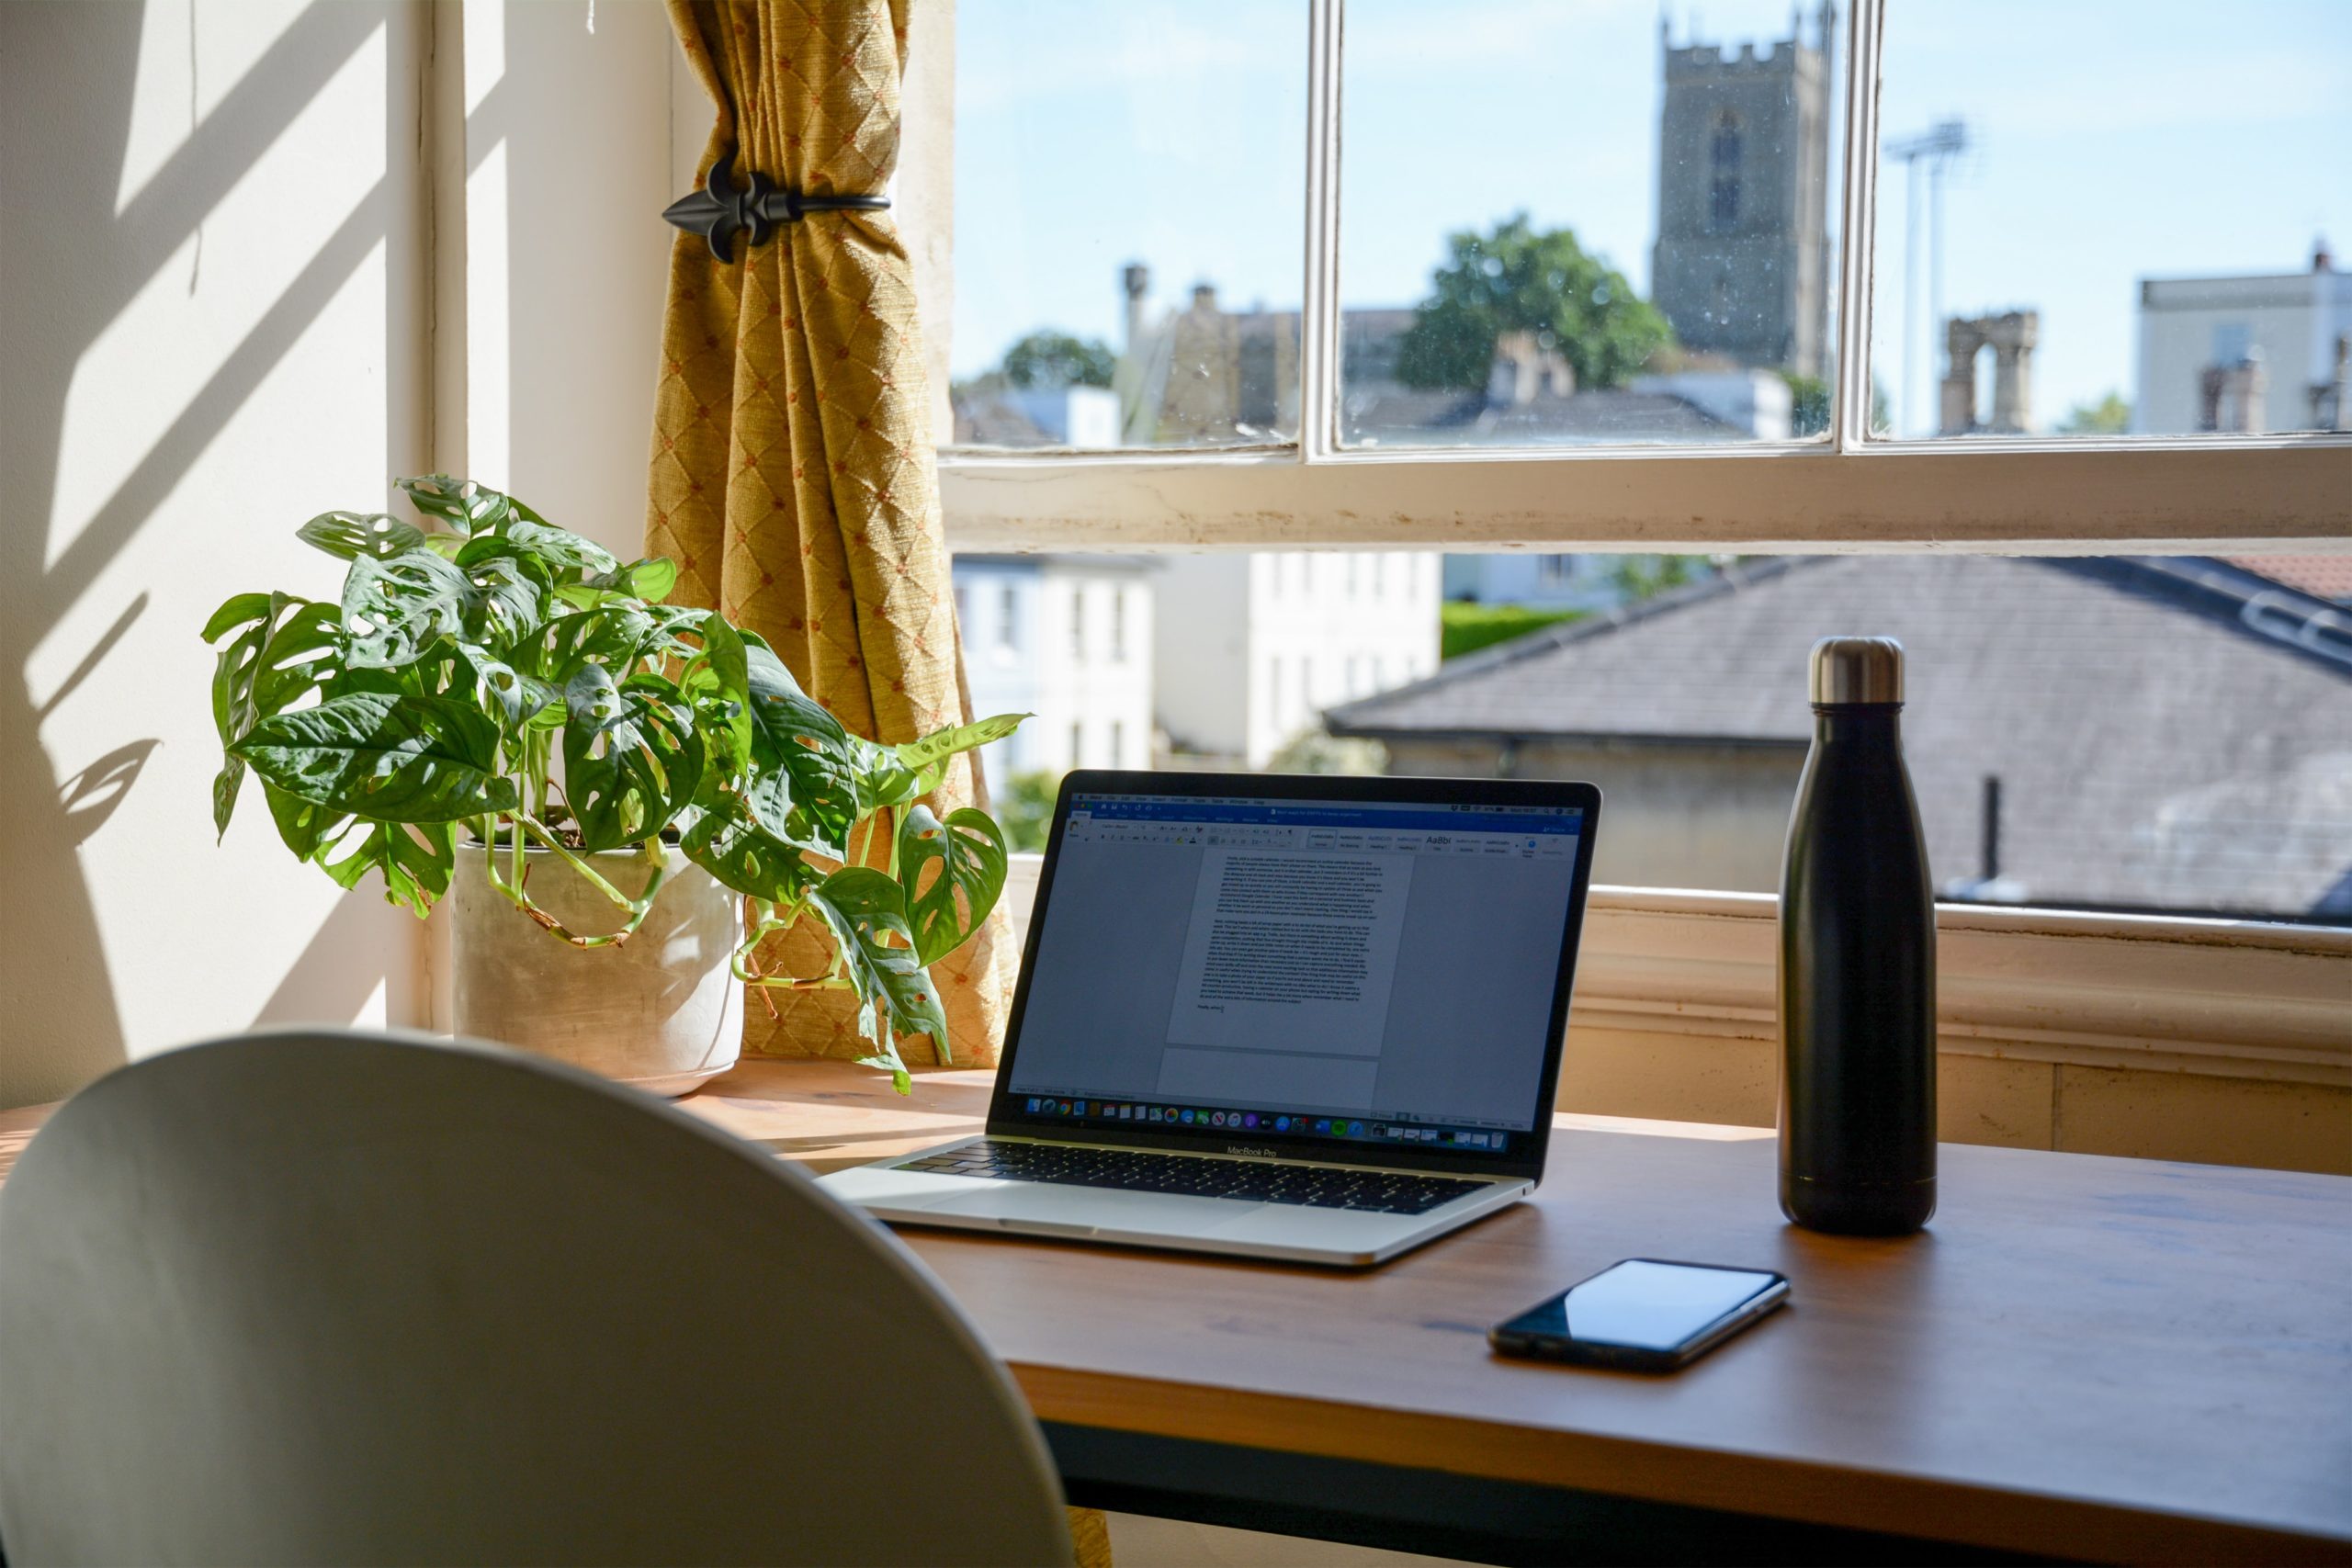 Desk setup with a plant, laptop, and a water bottle